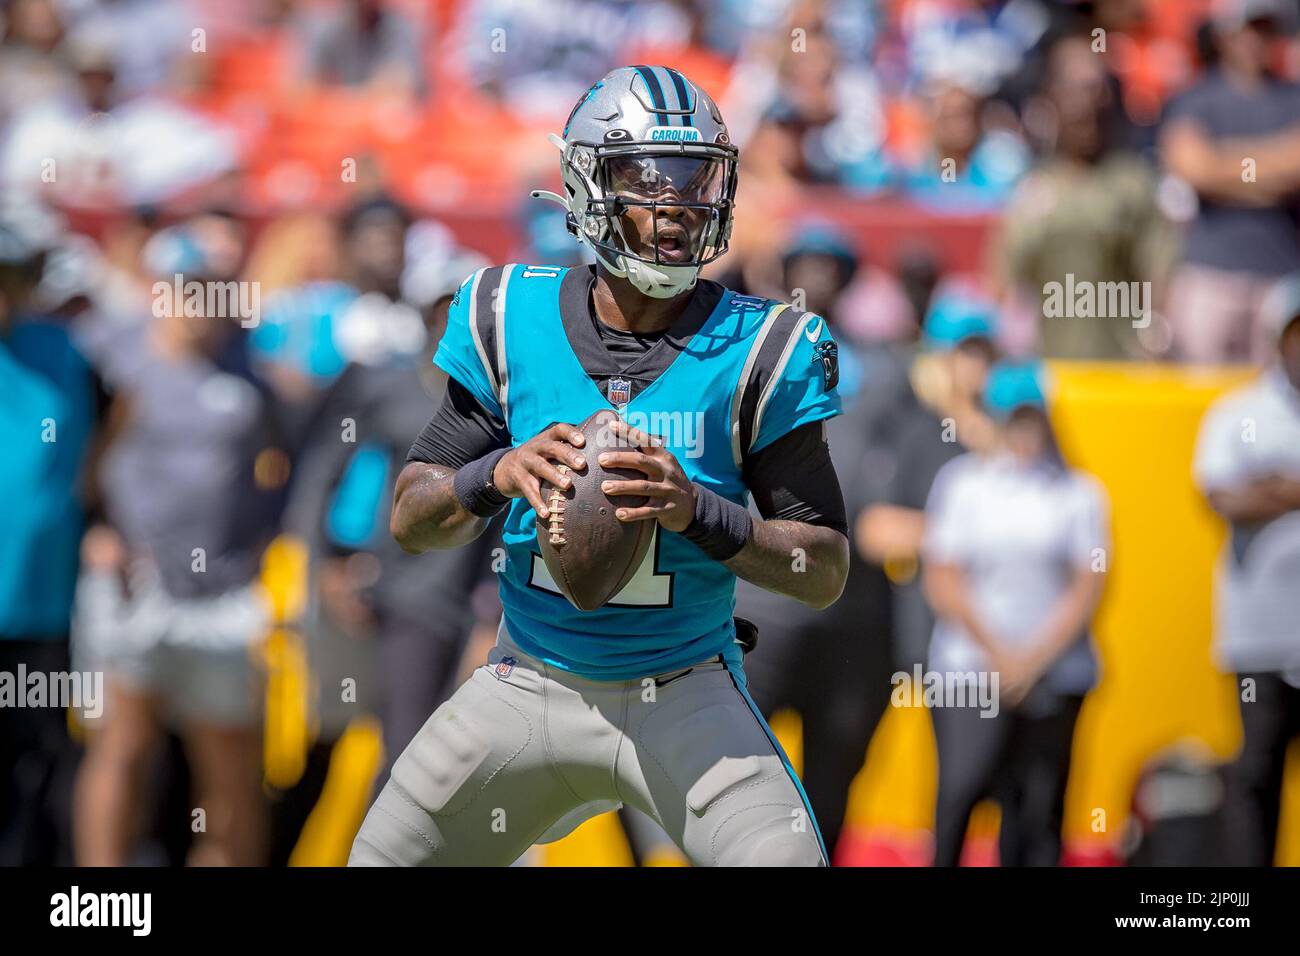 August 13, 2022 : Carolina Panthers quarterback PJ Walker (11) drops back to pass during the preseason game between the Carolina Panthers and Washington Commanders played at Fed Ex Field in Landover, MD. Photographer: Cory Royster Stock Photo